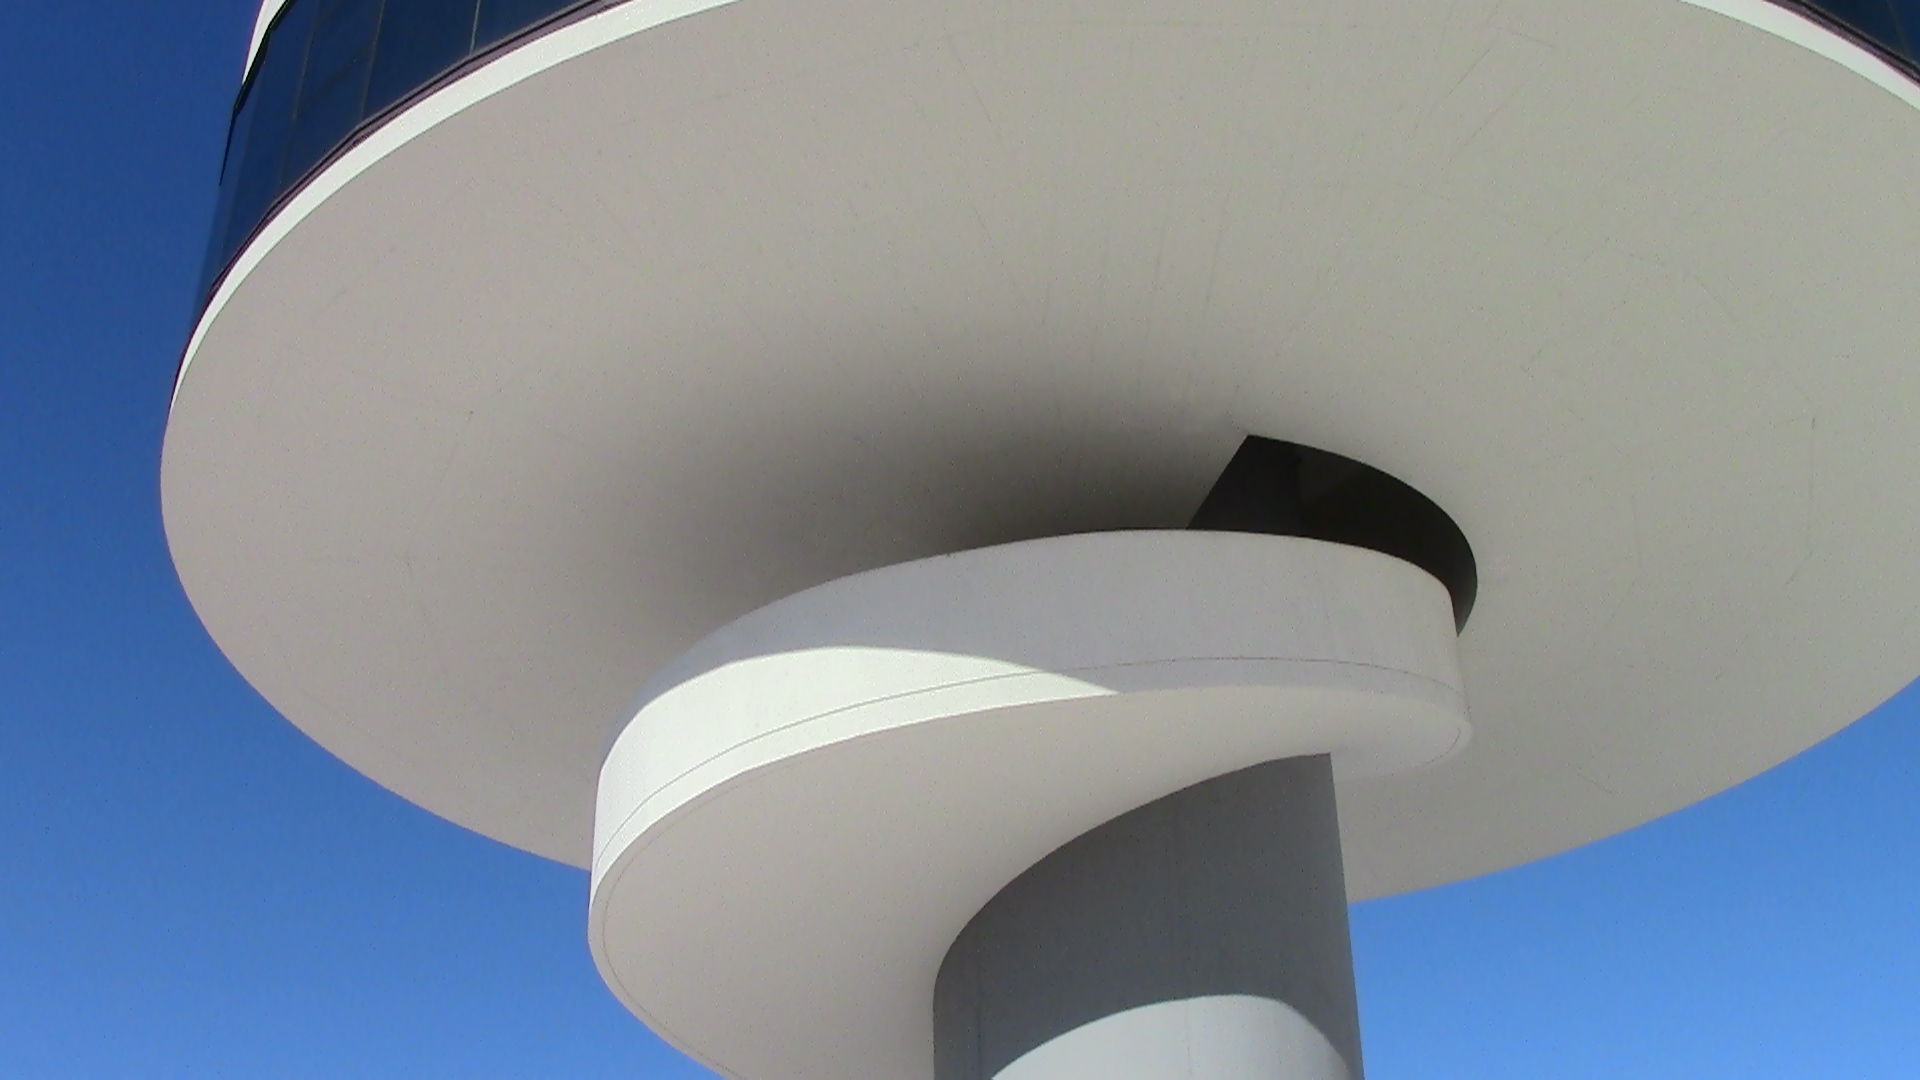 Avilés, Asturias – Oscar Niemeyer: It’s no Frank Geary Guggenheim, but then that takes money. The Niemeyer museum is in the port of Avilés.